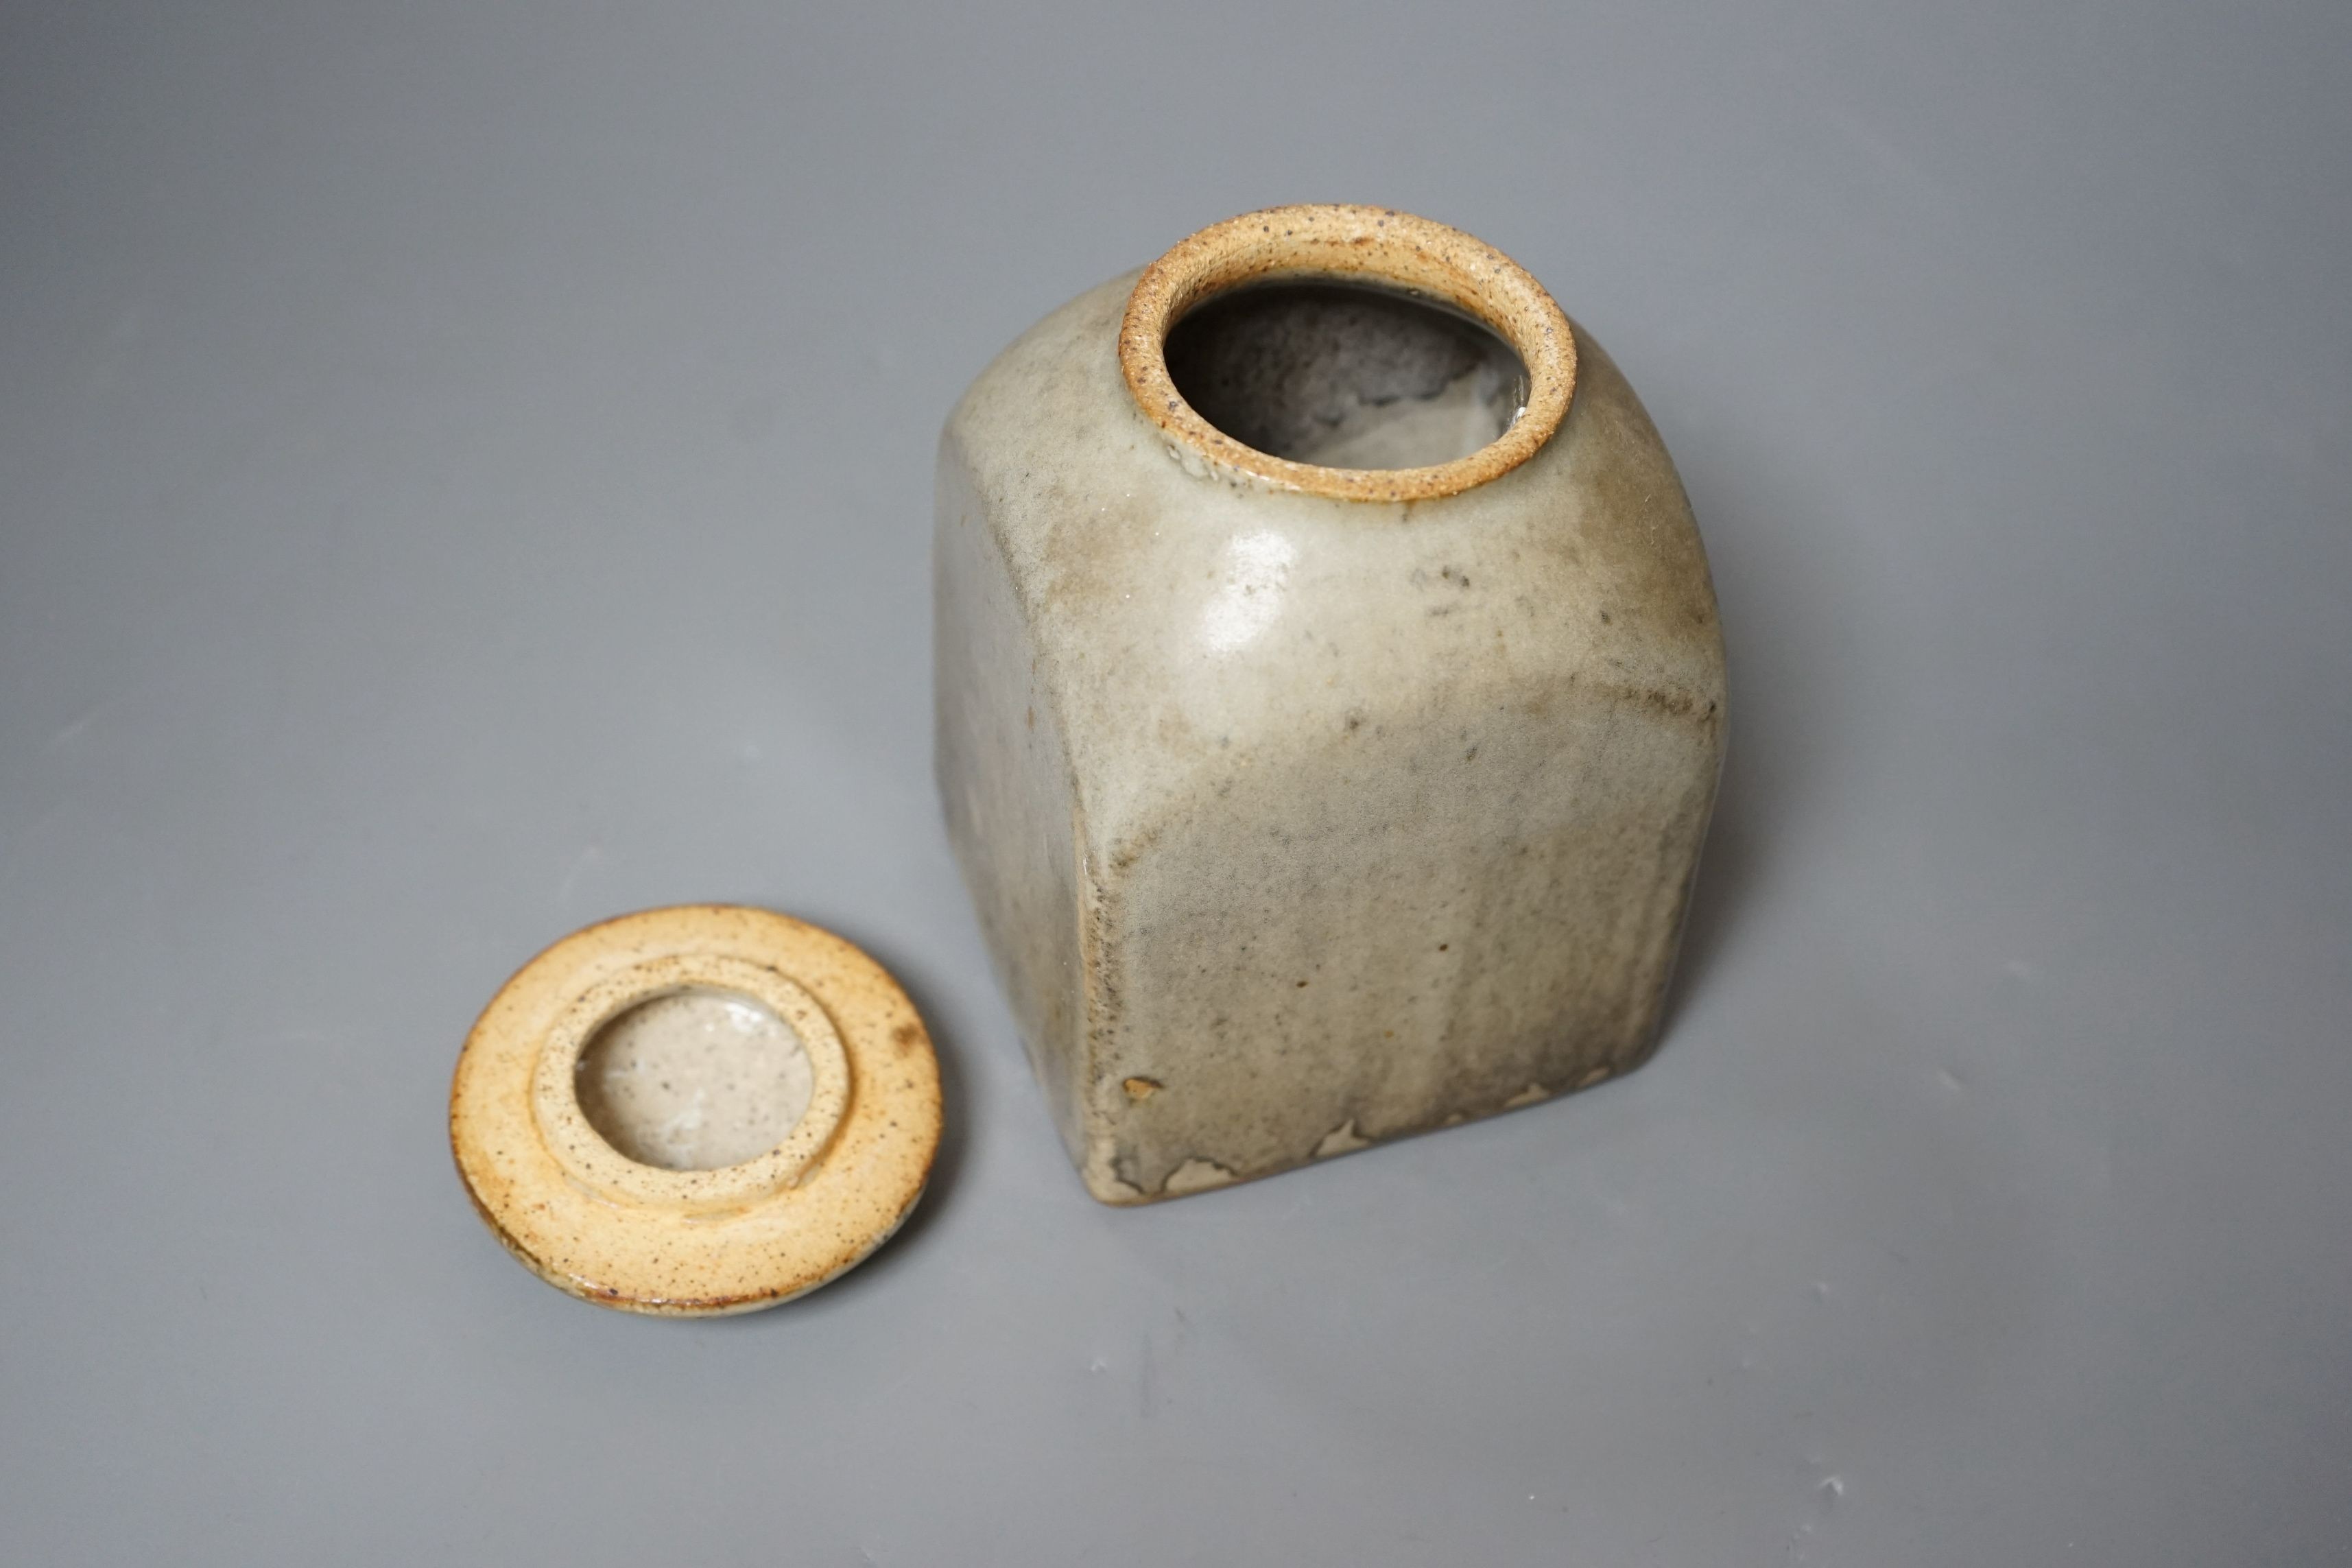 Bernard Leach for St Ives pottery, a mushroom-grey glazed square sided jar and cover, impressed marks to base, 16.5cm tall